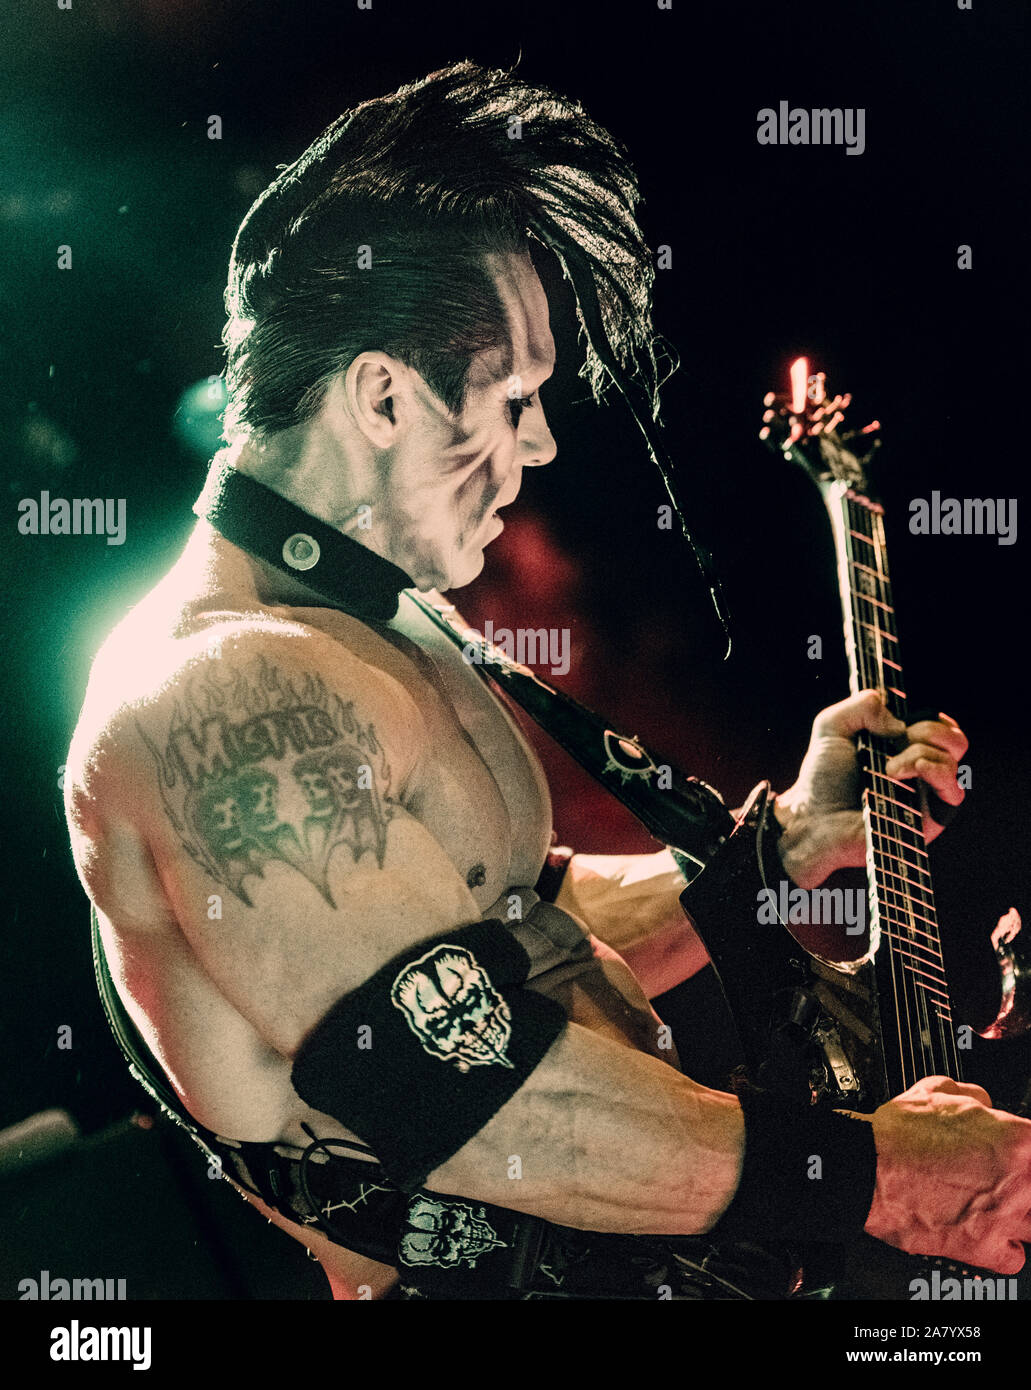 Copenhagen, Denmark. 04th, November 2019. The American rock band Doyle  performs a live concert at Amager Bio in Copenhagen. Here guitarist Doyle  Wolfgang von Frankenstein is seen live on stage. (Photo credit: